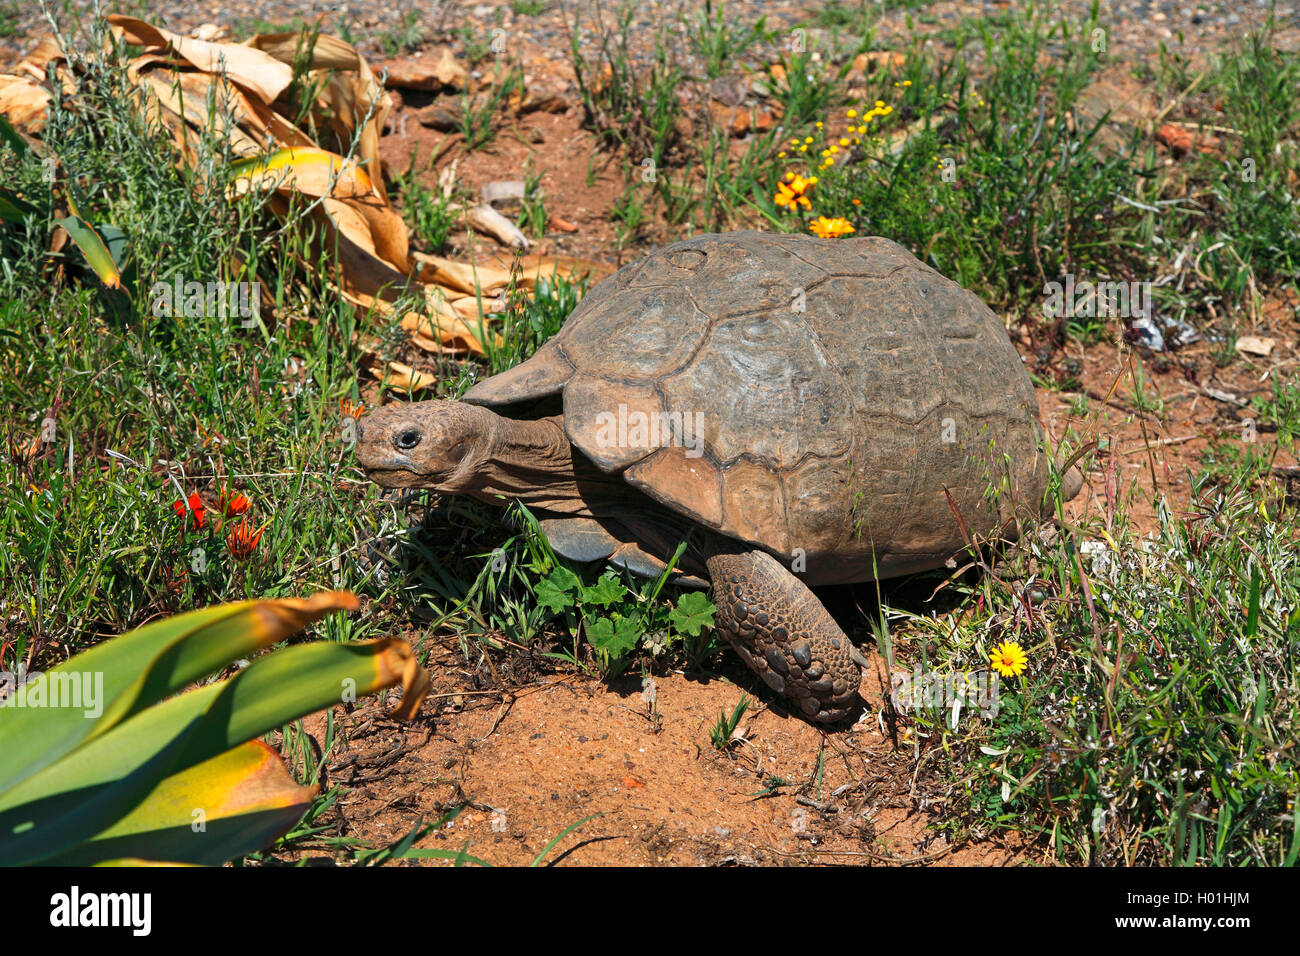 South African bowsprit tortoise (Chersina angulata), walking, South Africa, Western Cape, Worcester Stock Photo